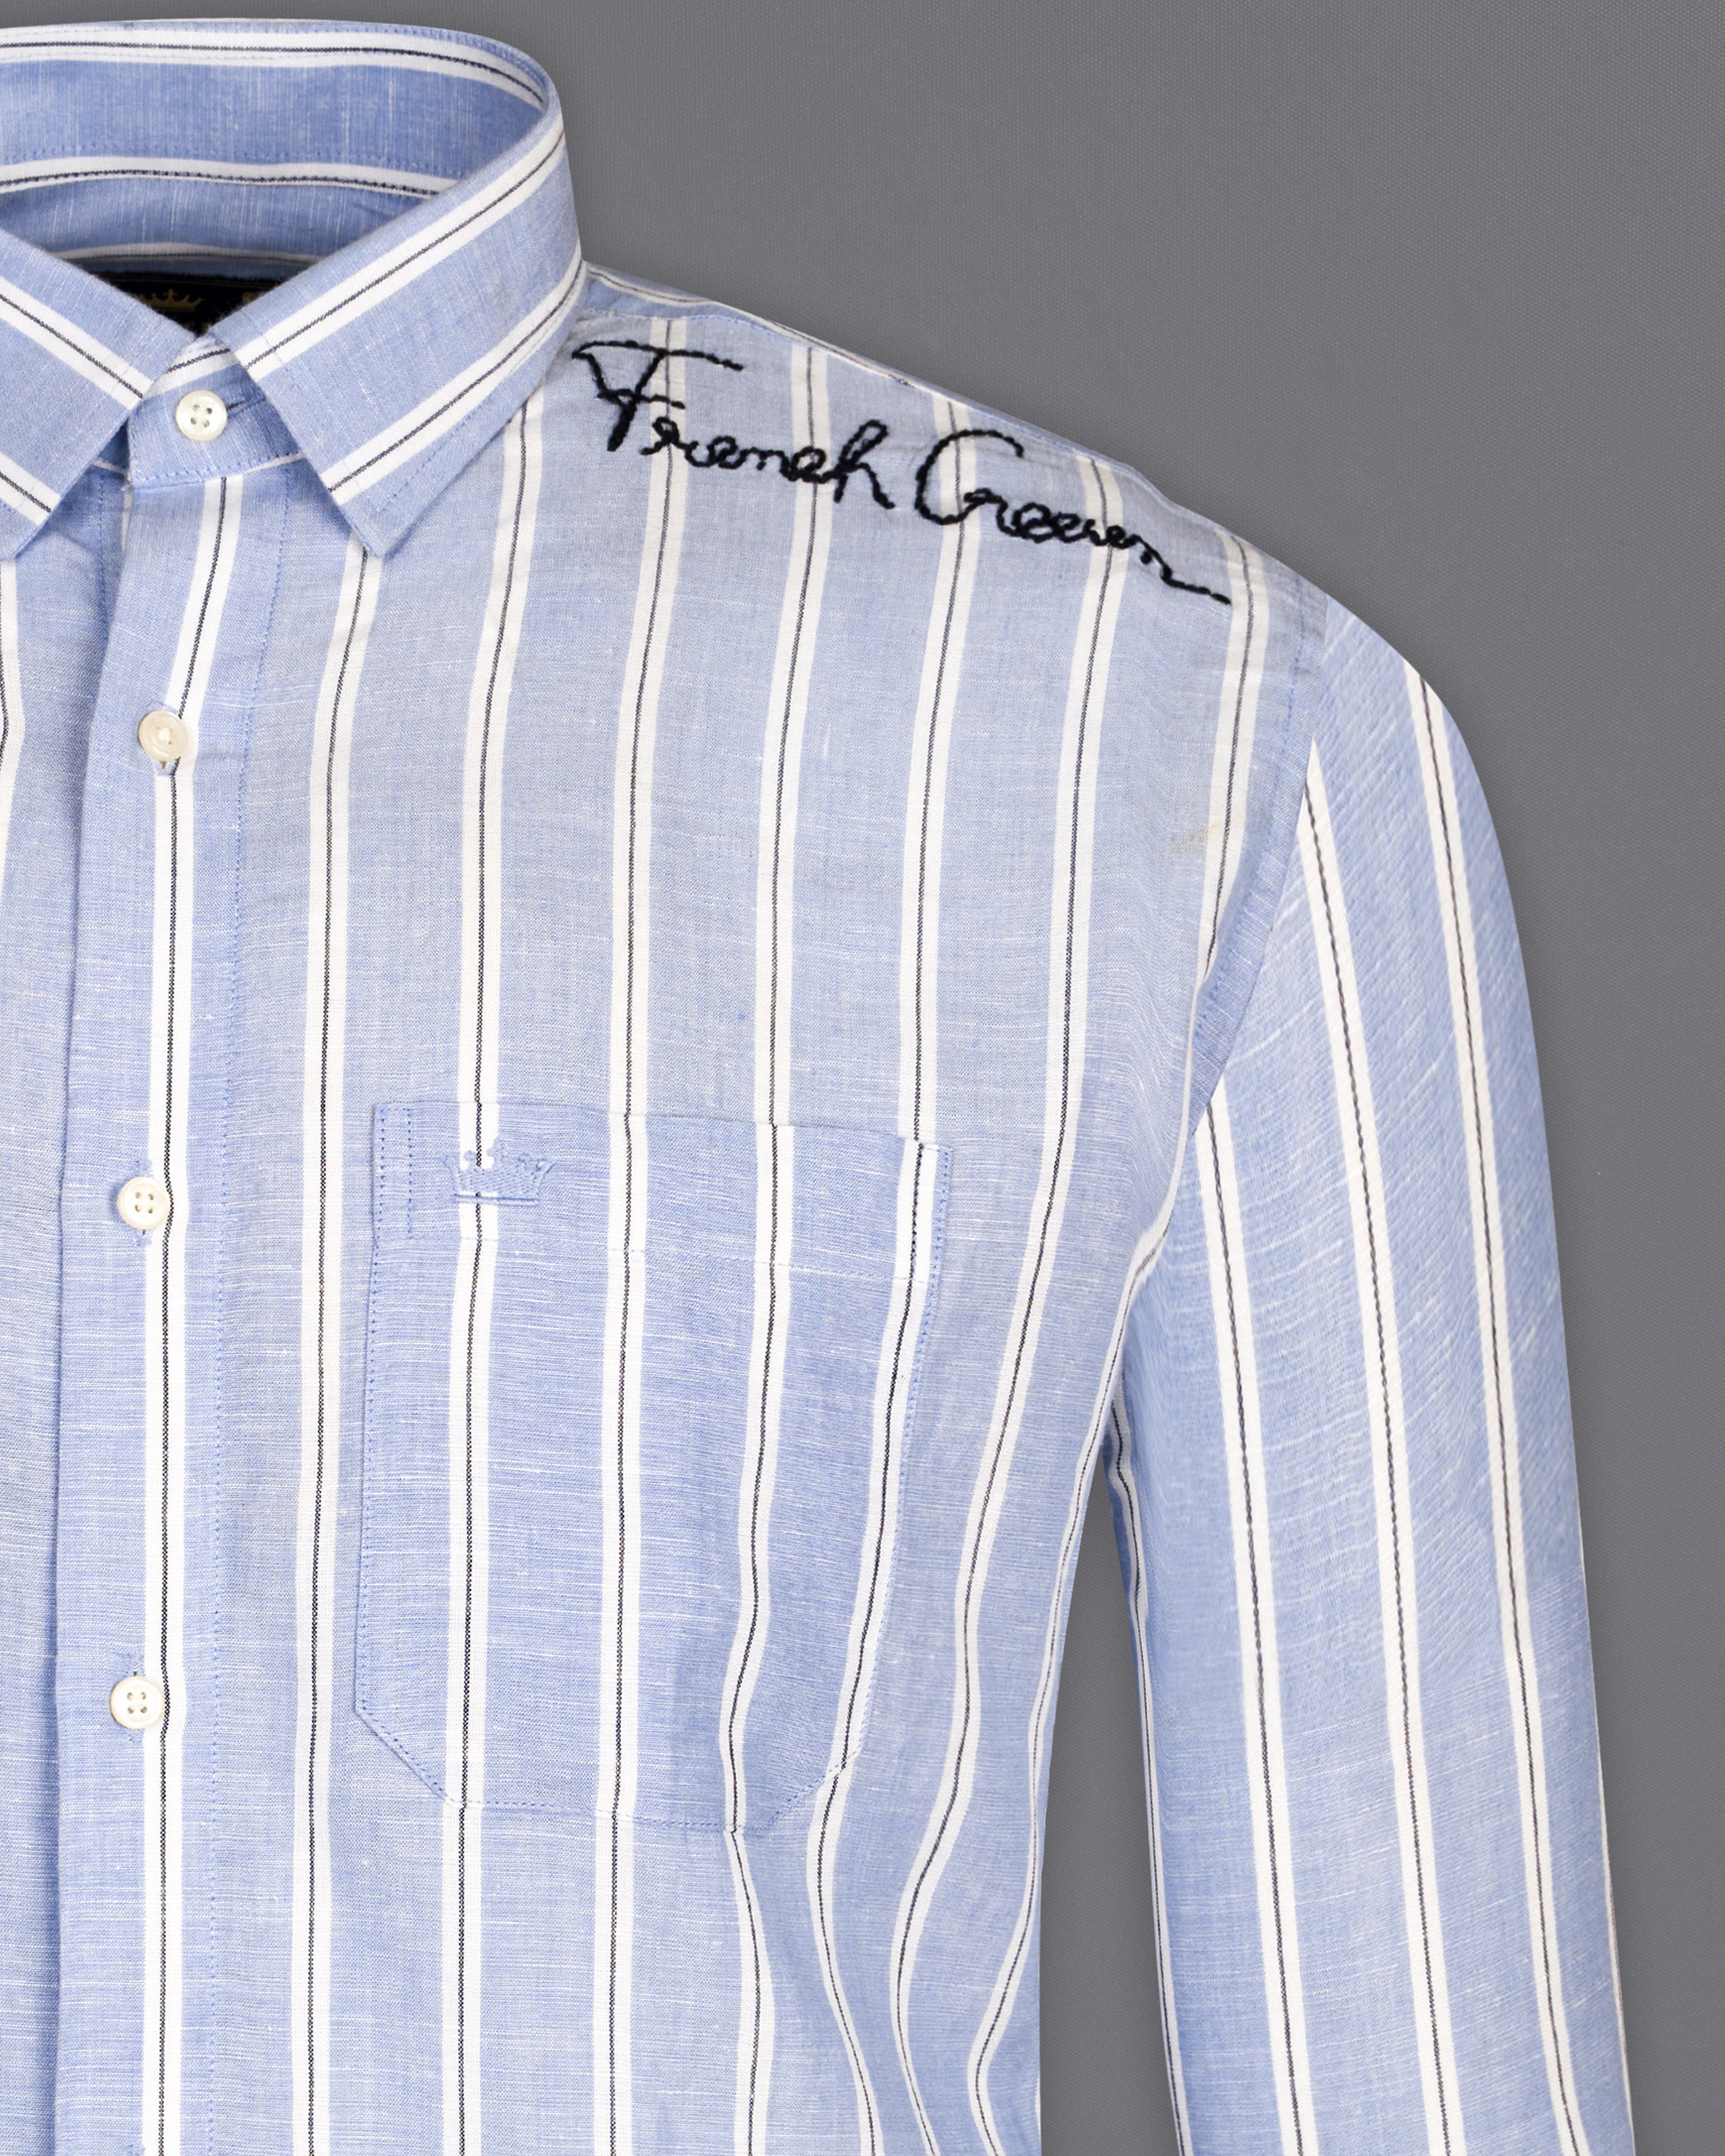 Periwinkle Blue and White Striped Luxurious Linen Hand Embroidered Signature Designer Shirt 7572-EH084-38, 7572-EH084-H-38, 7572-EH084-39, 7572-EH084-H-39, 7572-EH084-40, 7572-EH084-H-40, 7572-EH084-42, 7572-EH084-H-42, 7572-EH084-44, 7572-EH084-H-44, 7572-EH084-46, 7572-EH084-H-46, 7572-EH084-48, 7572-EH084-H-48, 7572-EH084-50, 7572-EH084-H-50, 7572-EH084-52, 7572-EH084-H-52